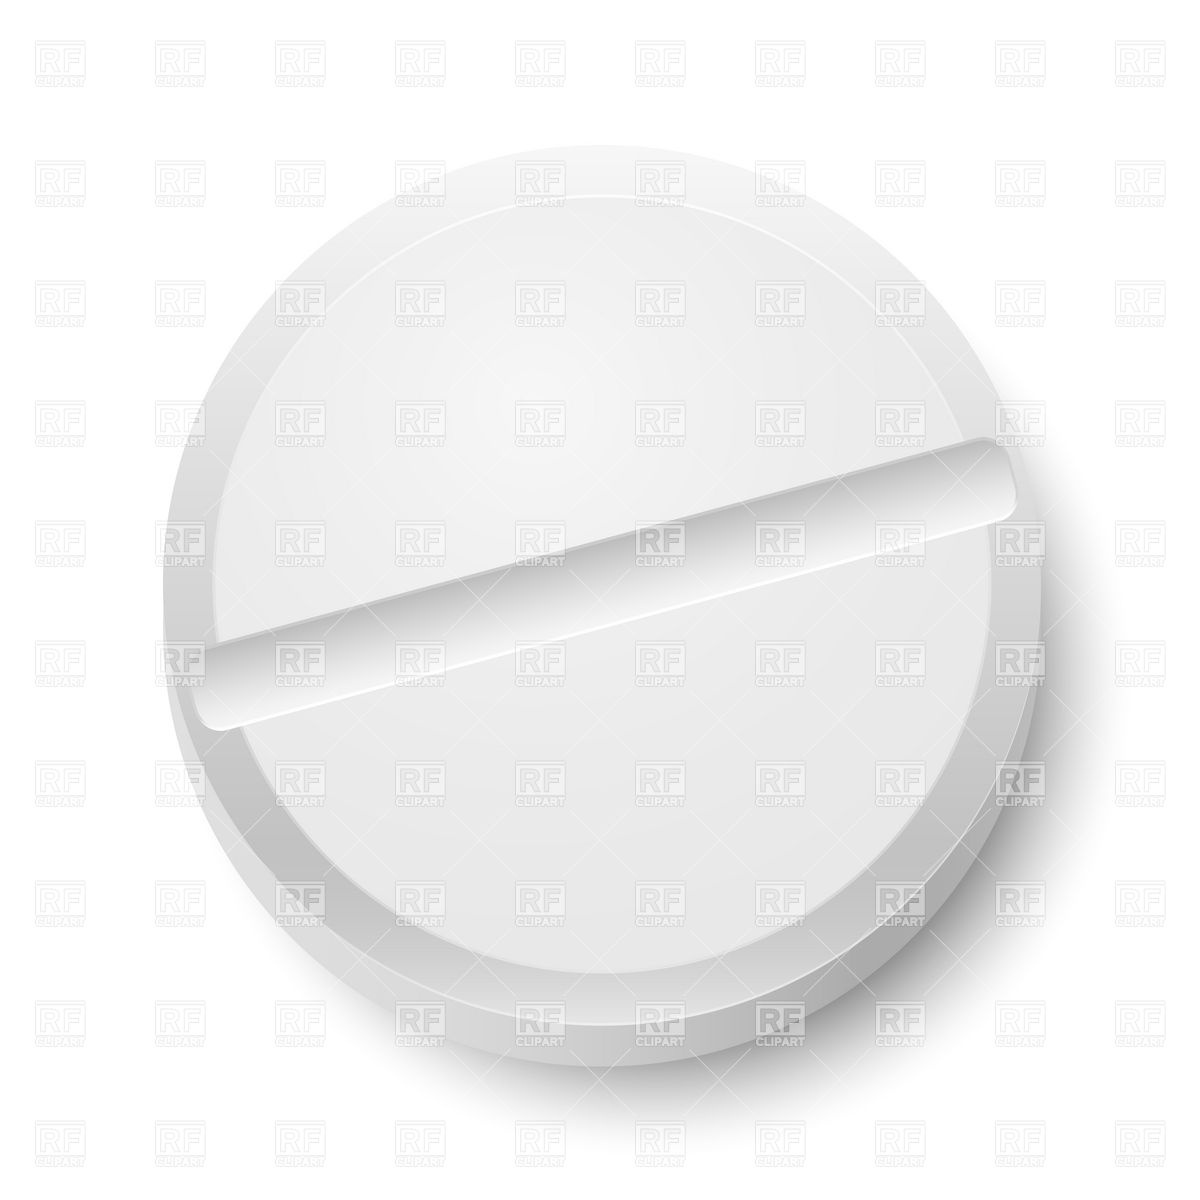 Realistic Round Aspirin Tablet  Pill  16243 Healthcare Medical